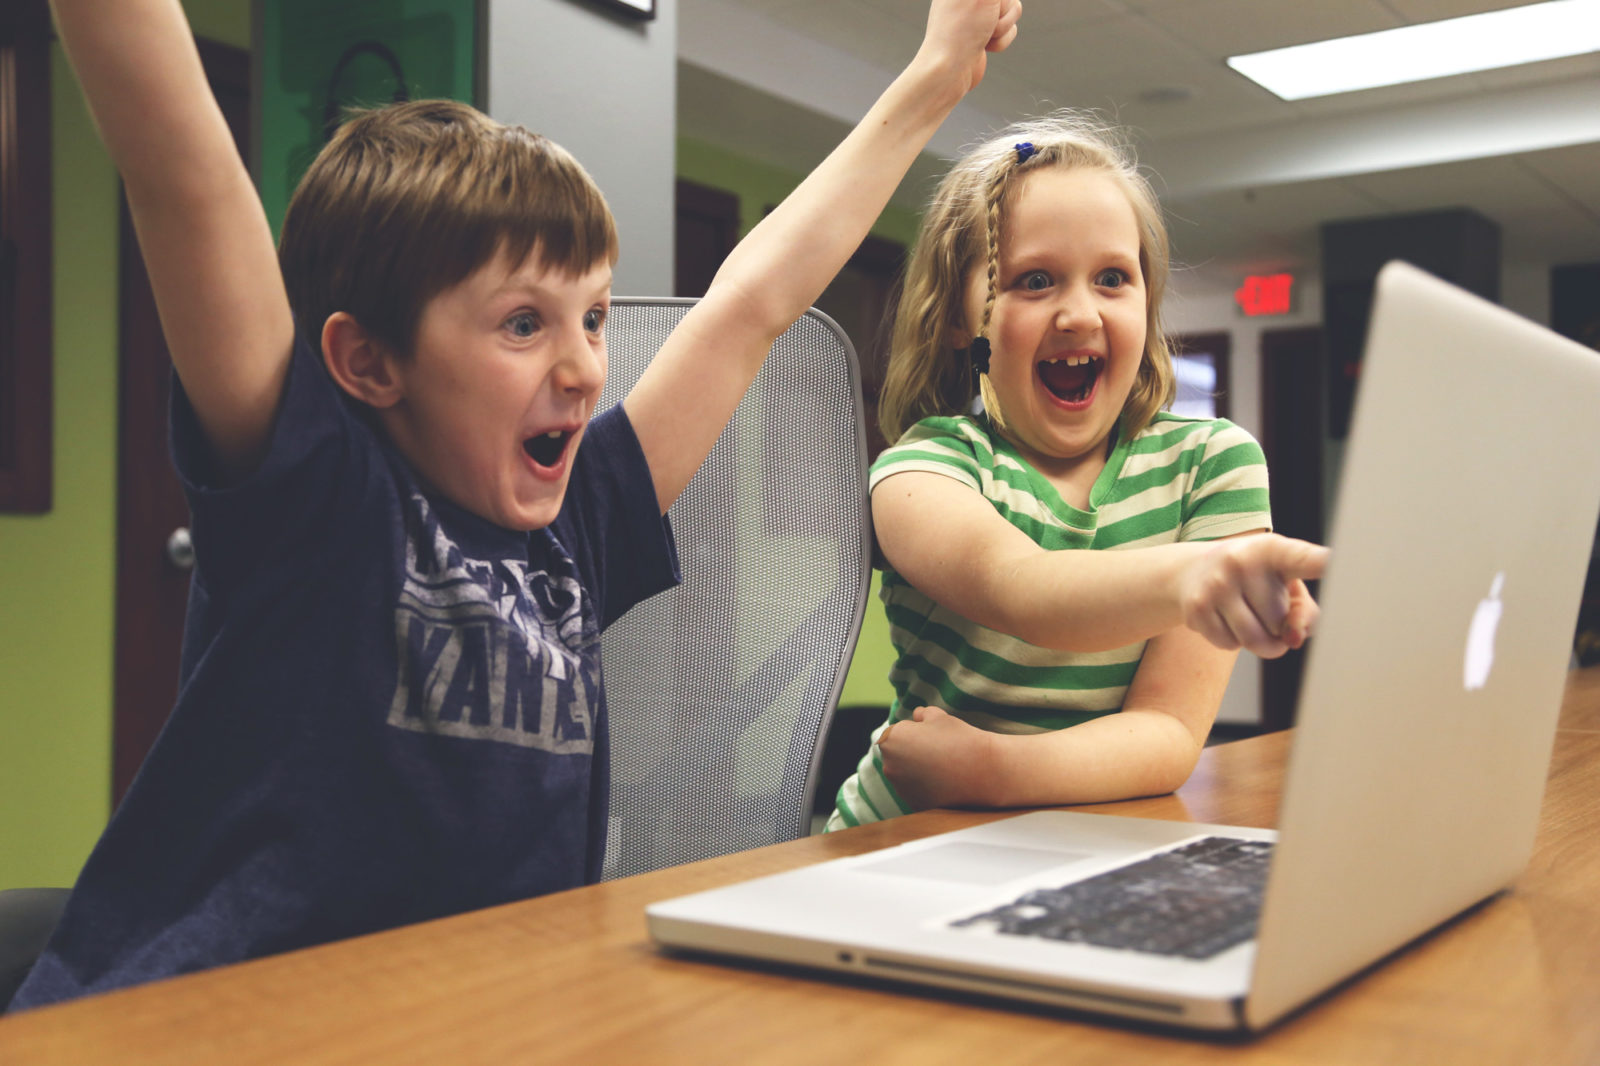 Two children cheering and pointing at a laptop screen.